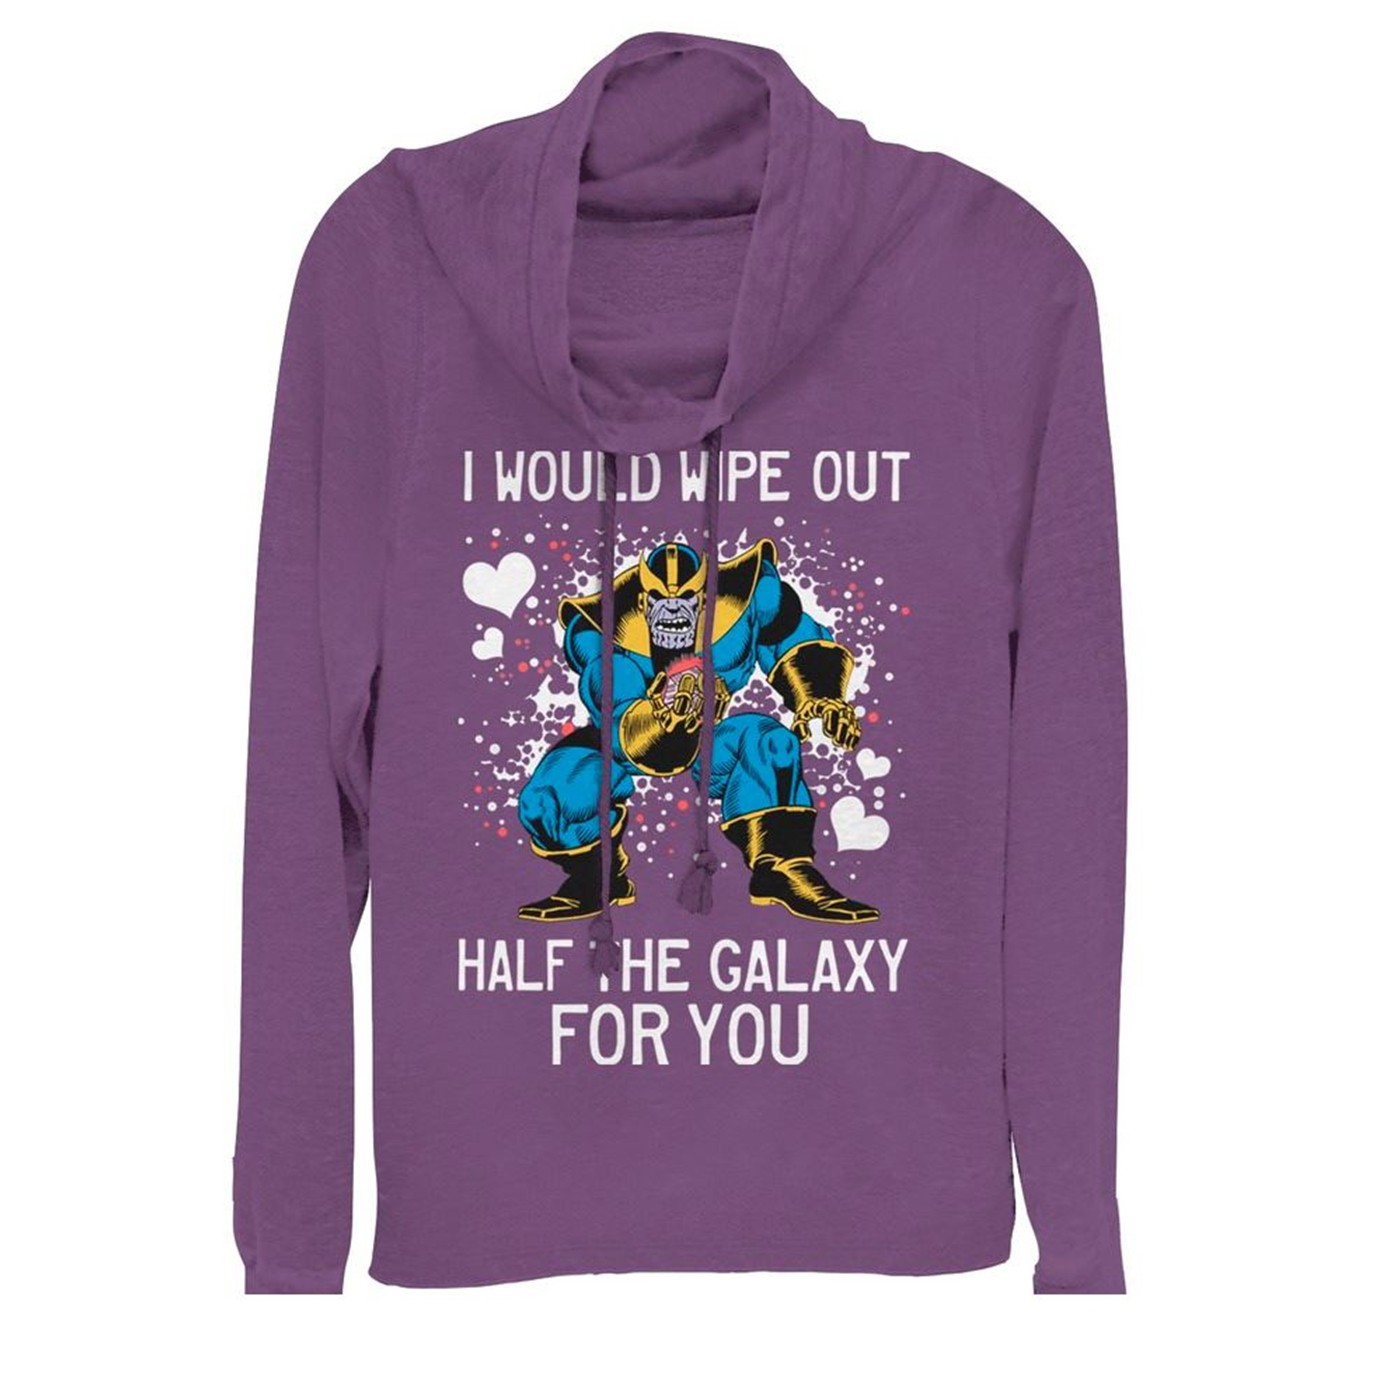 Valentine's Thanos Wipe Out Galaxy for You Cowl Neck Women's Sweatshirt